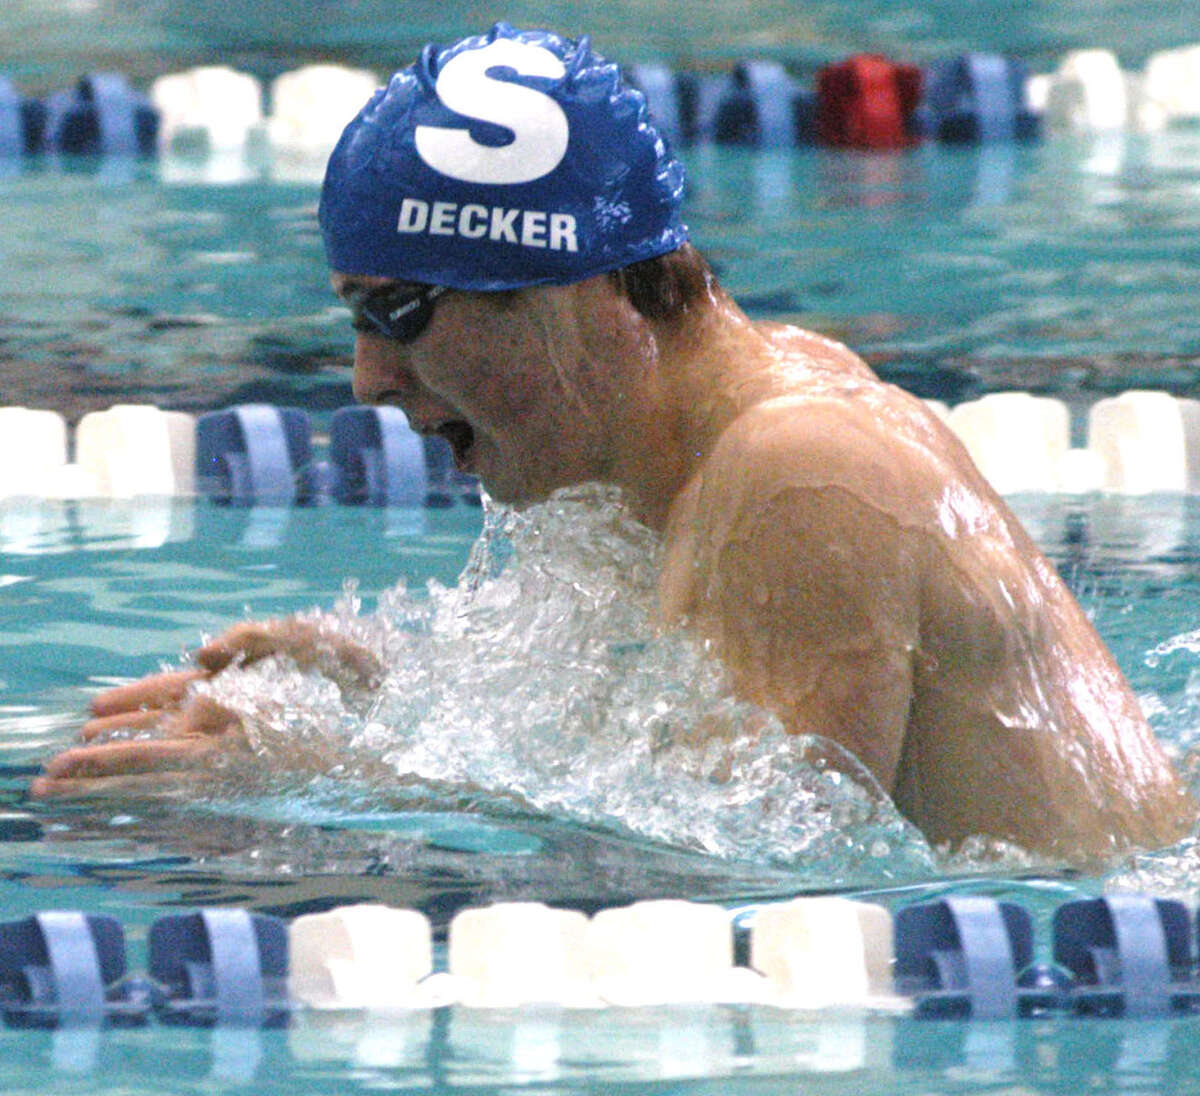 Spartan frosh Colin Decker, en route to laurels as the meet's MVP, leaves his rivals well in his wake as he scores an impressive win in the 200-yard individual medley for Shepaug Valley High School during the Berkshire League championship meet at Hotchkiss School in Lakeville, March 2, 2013